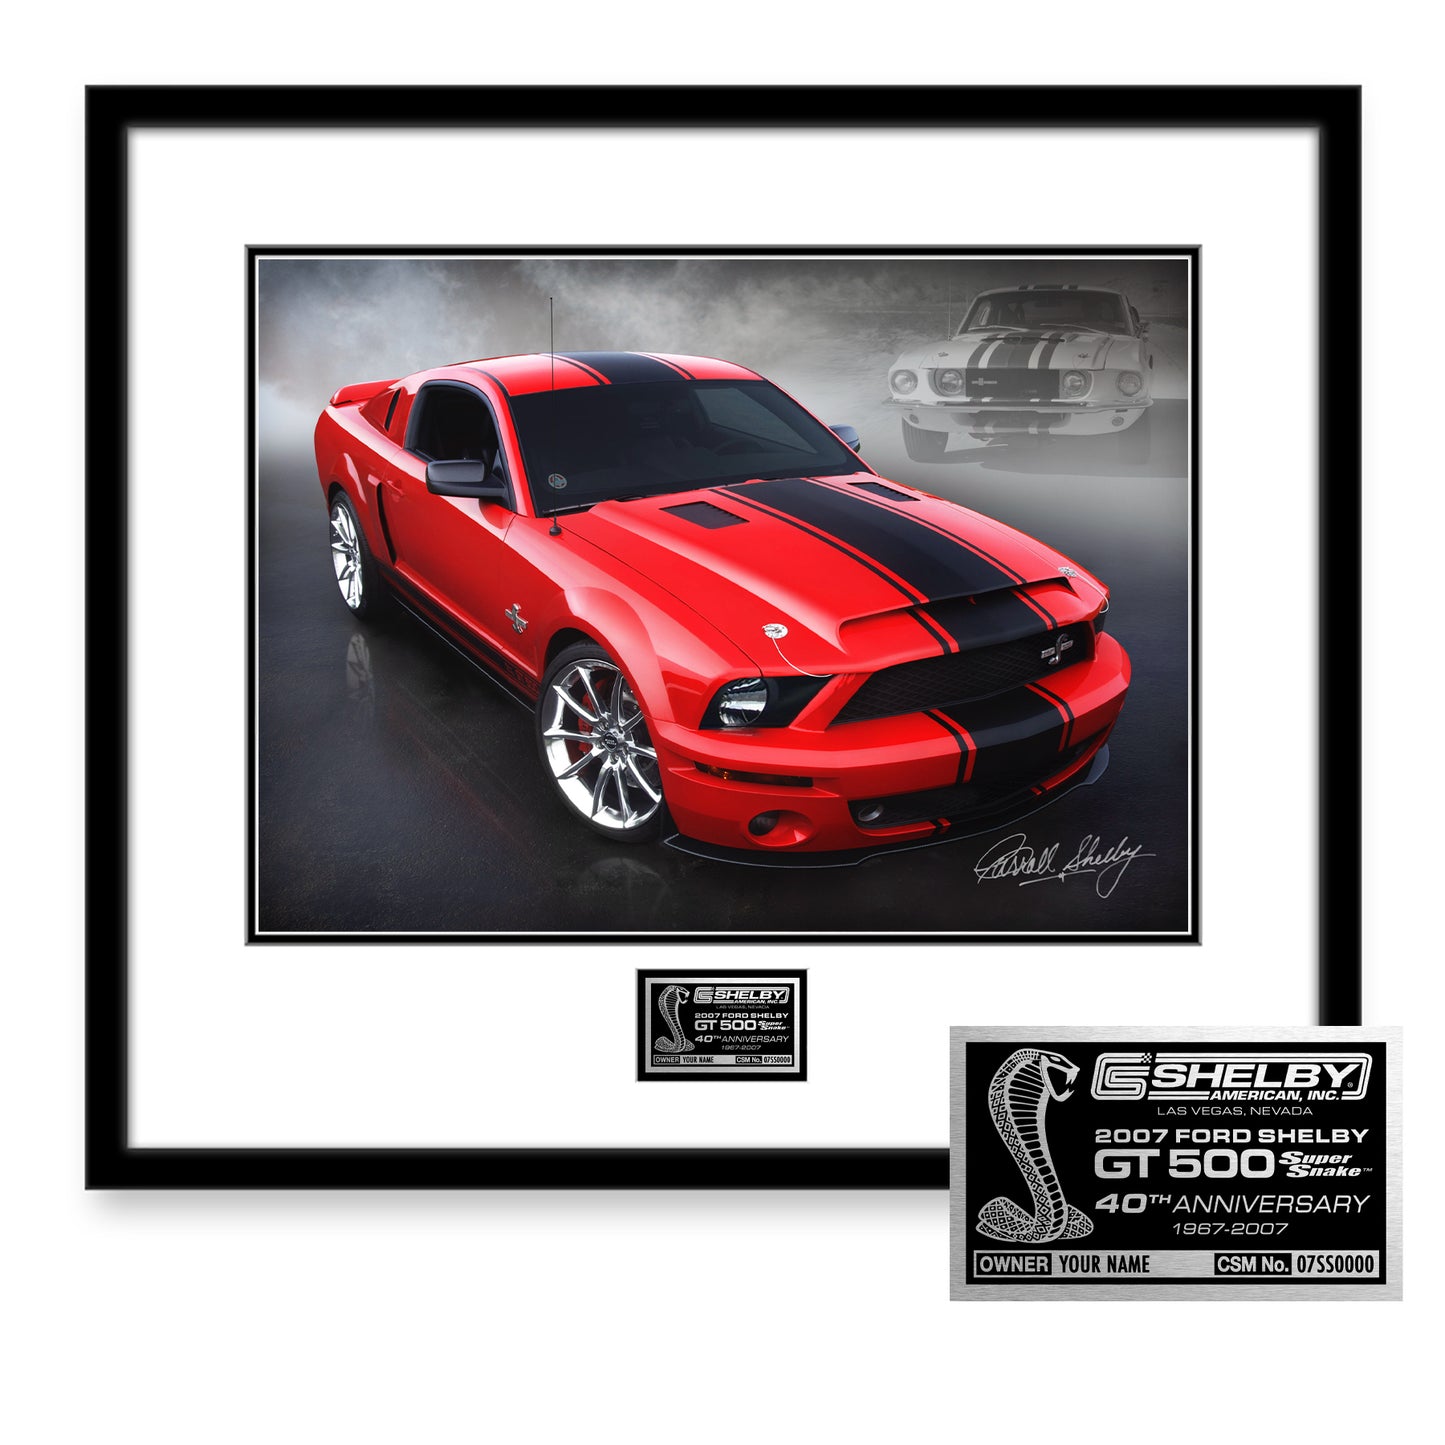 BUILD MY 2007 40TH ANNIV SHELBY GT500SS